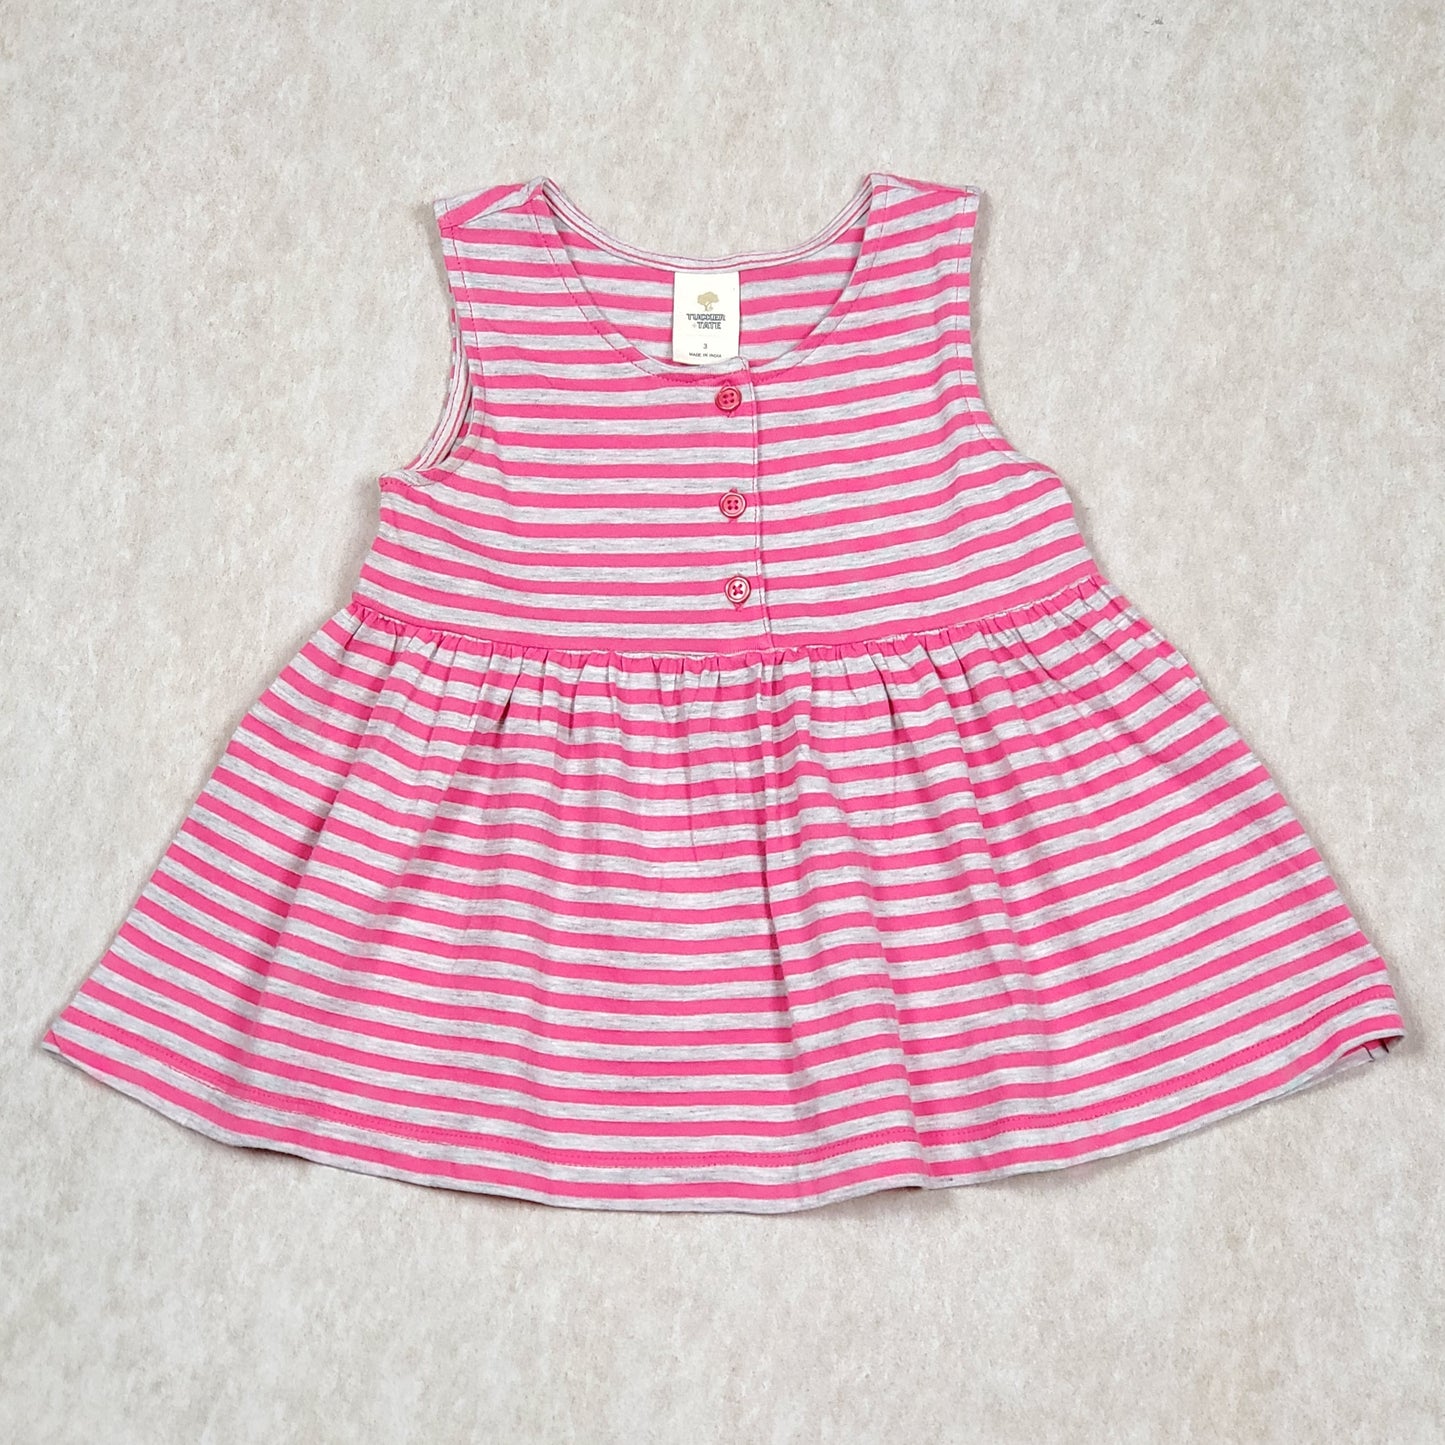 Tucker and Tate Girls Striped Pink Top NWT View 1